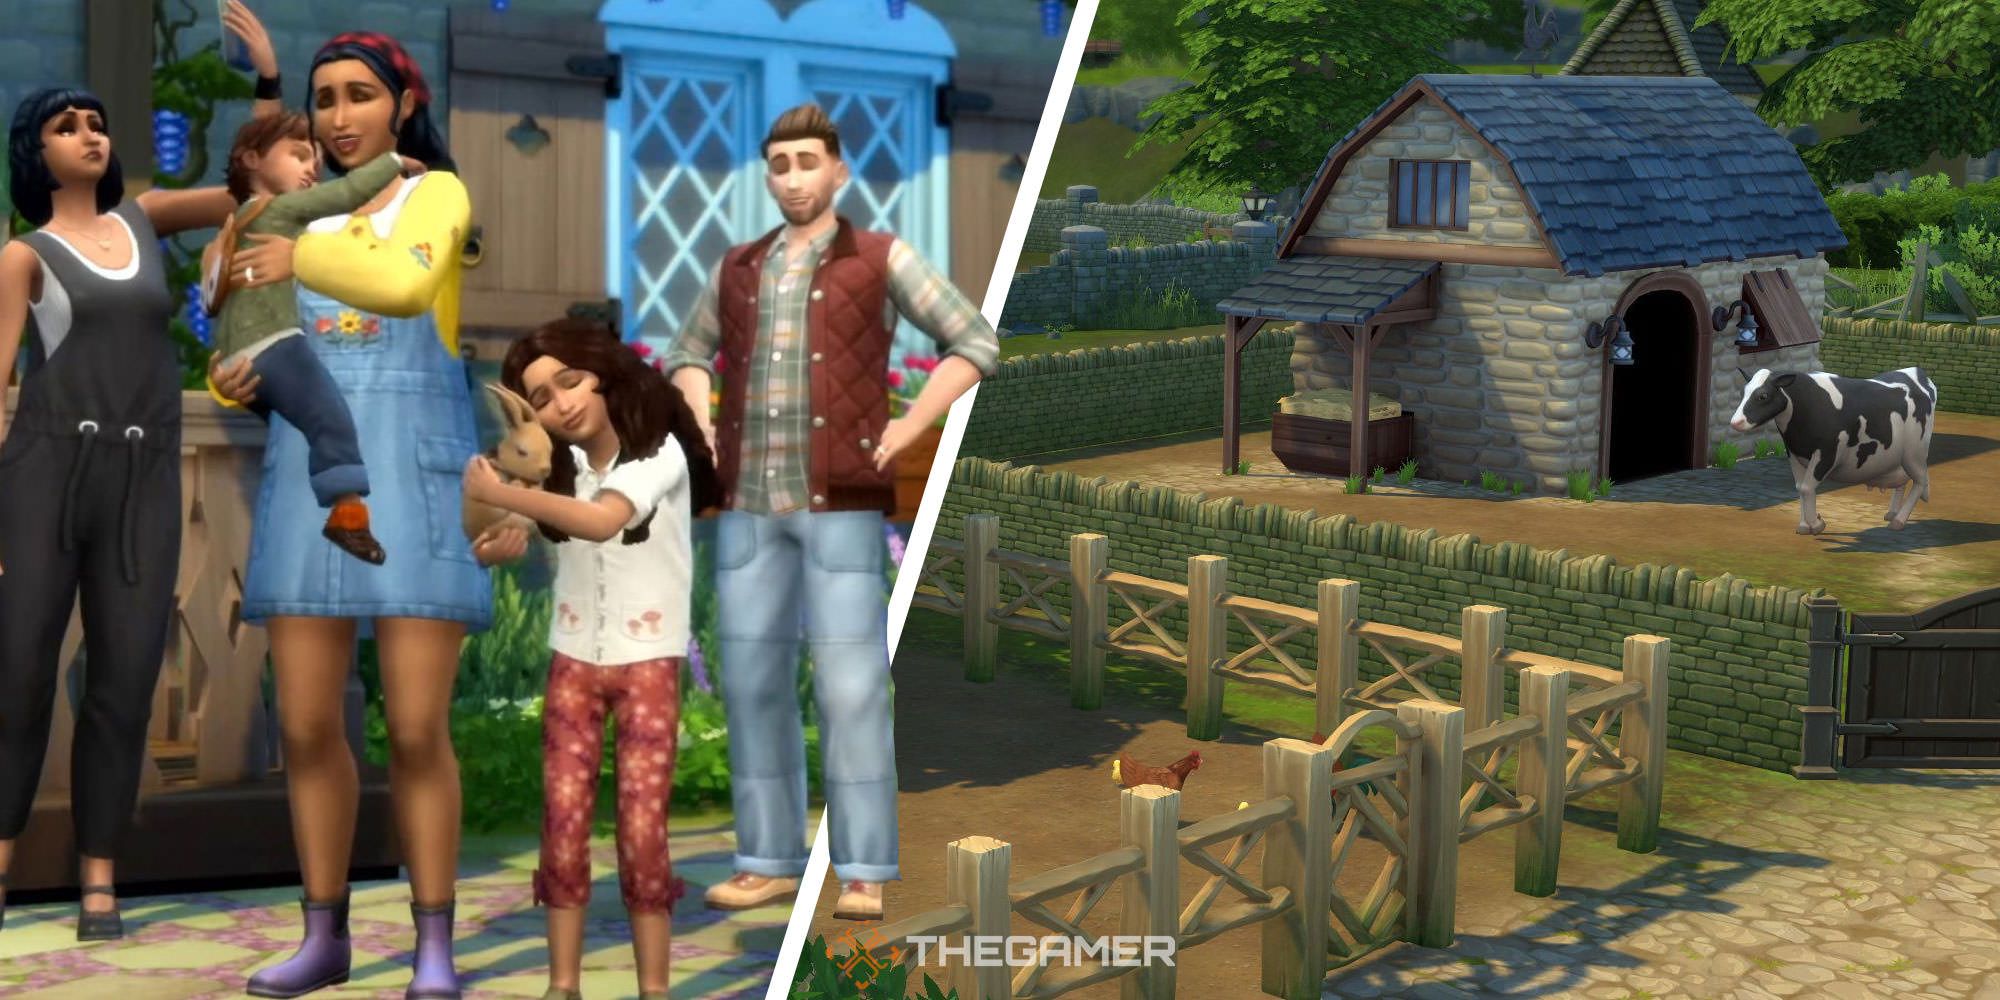 Sims 4 cottage living